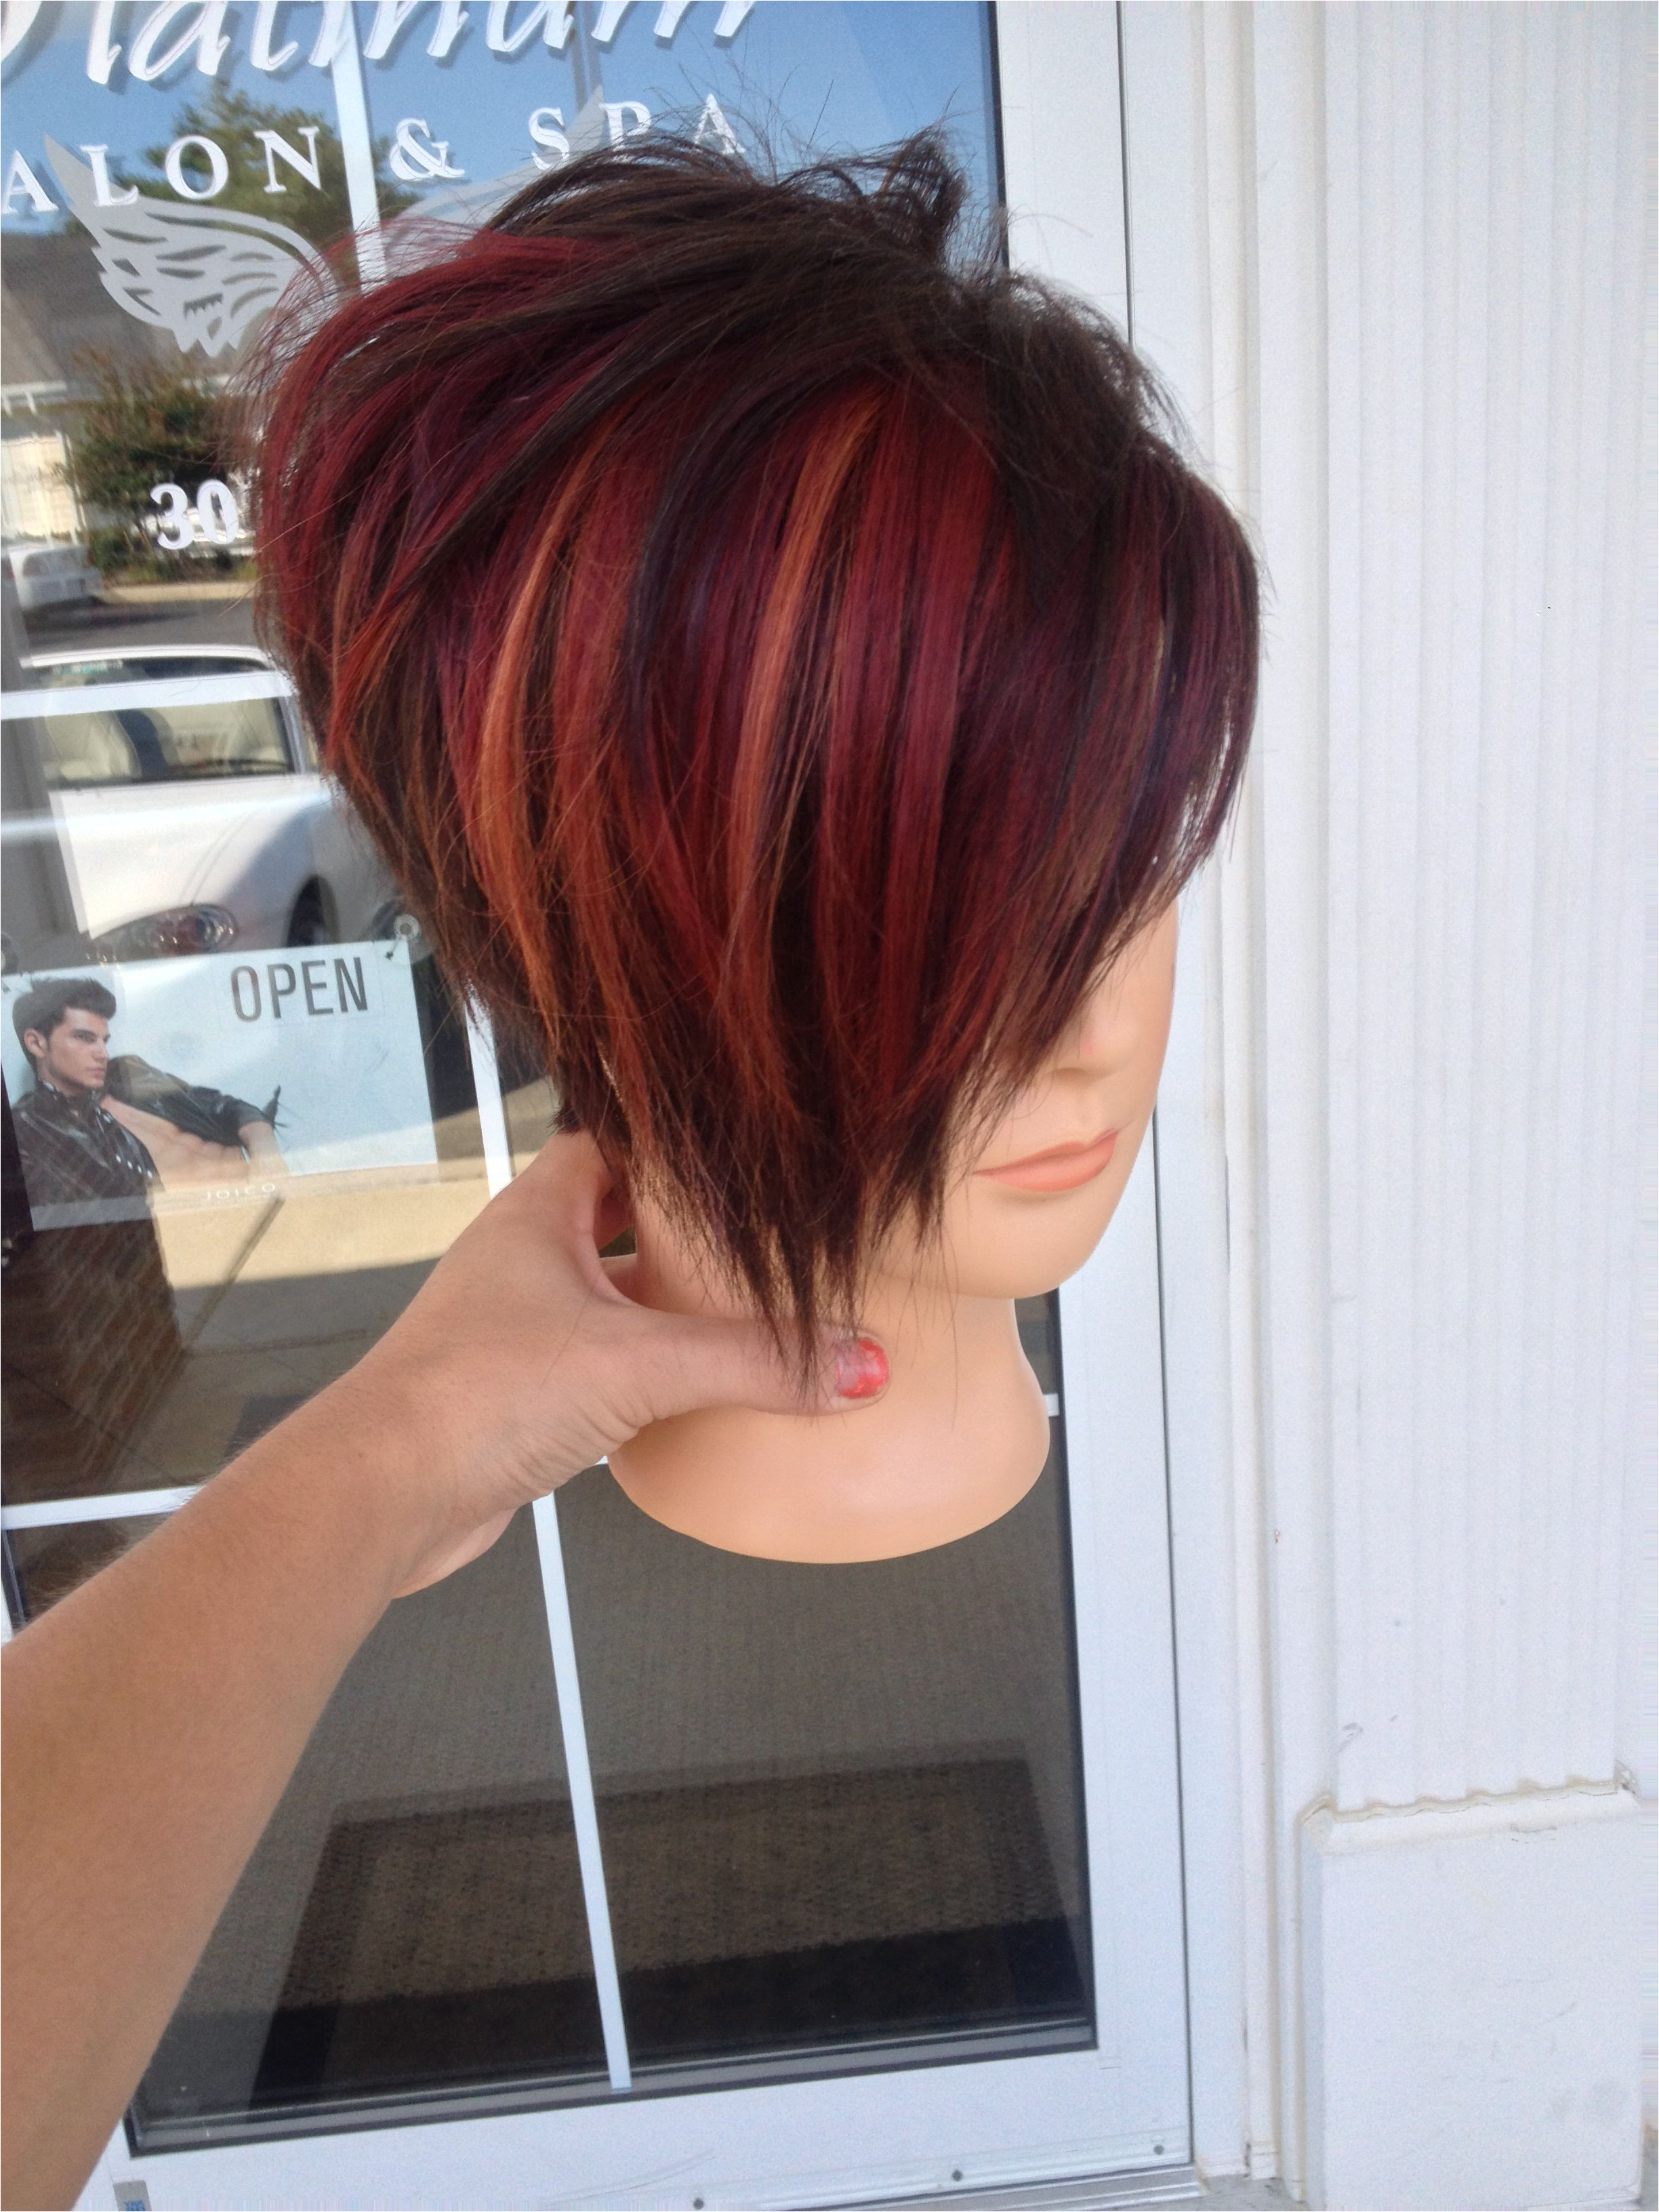 Dyed Hairstyles for Short Hair 14 Cool Funky Hairstyles Hair